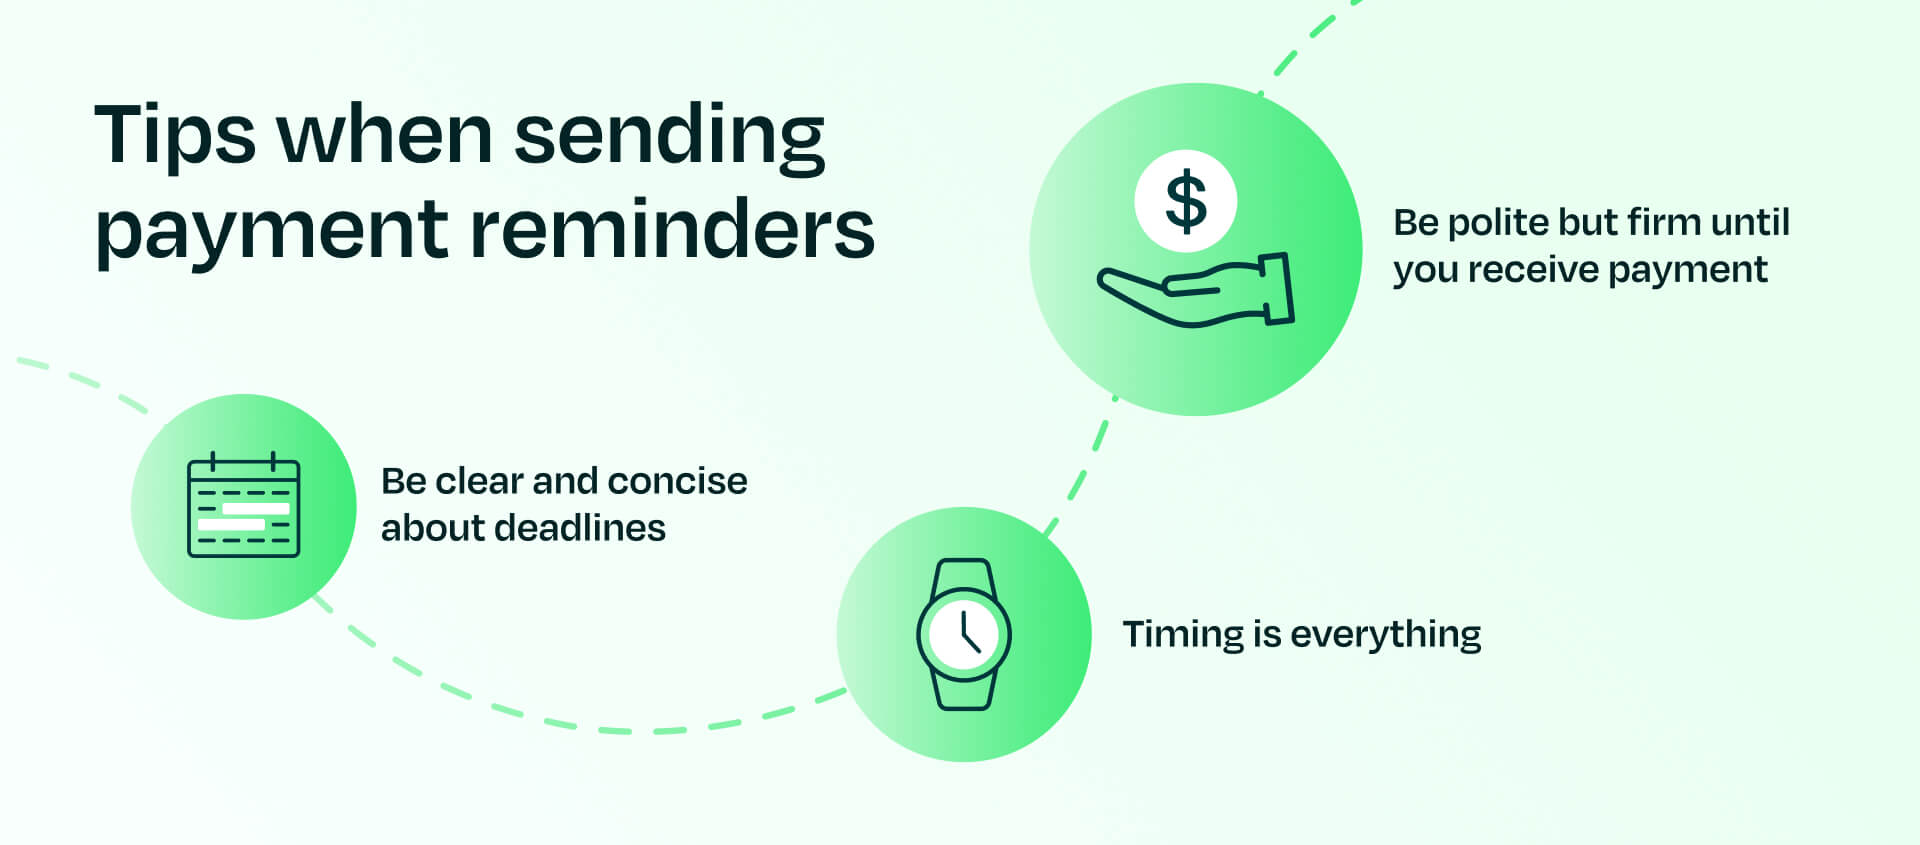 Tips when sending payment reminders chart